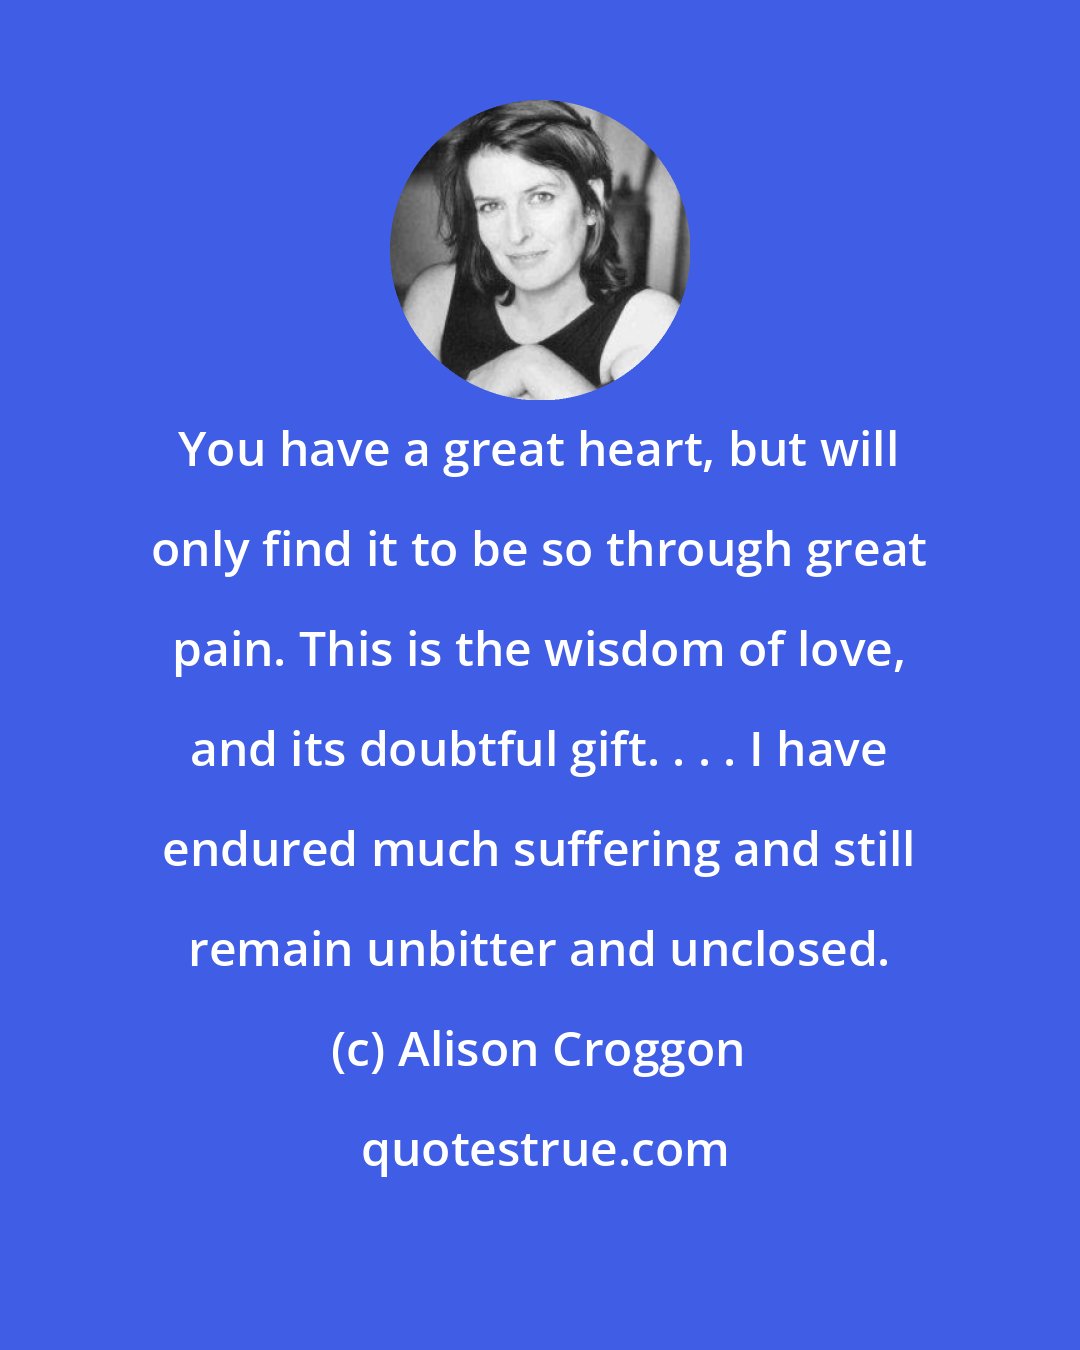 Alison Croggon: You have a great heart, but will only find it to be so through great pain. This is the wisdom of love, and its doubtful gift. . . . I have endured much suffering and still remain unbitter and unclosed.